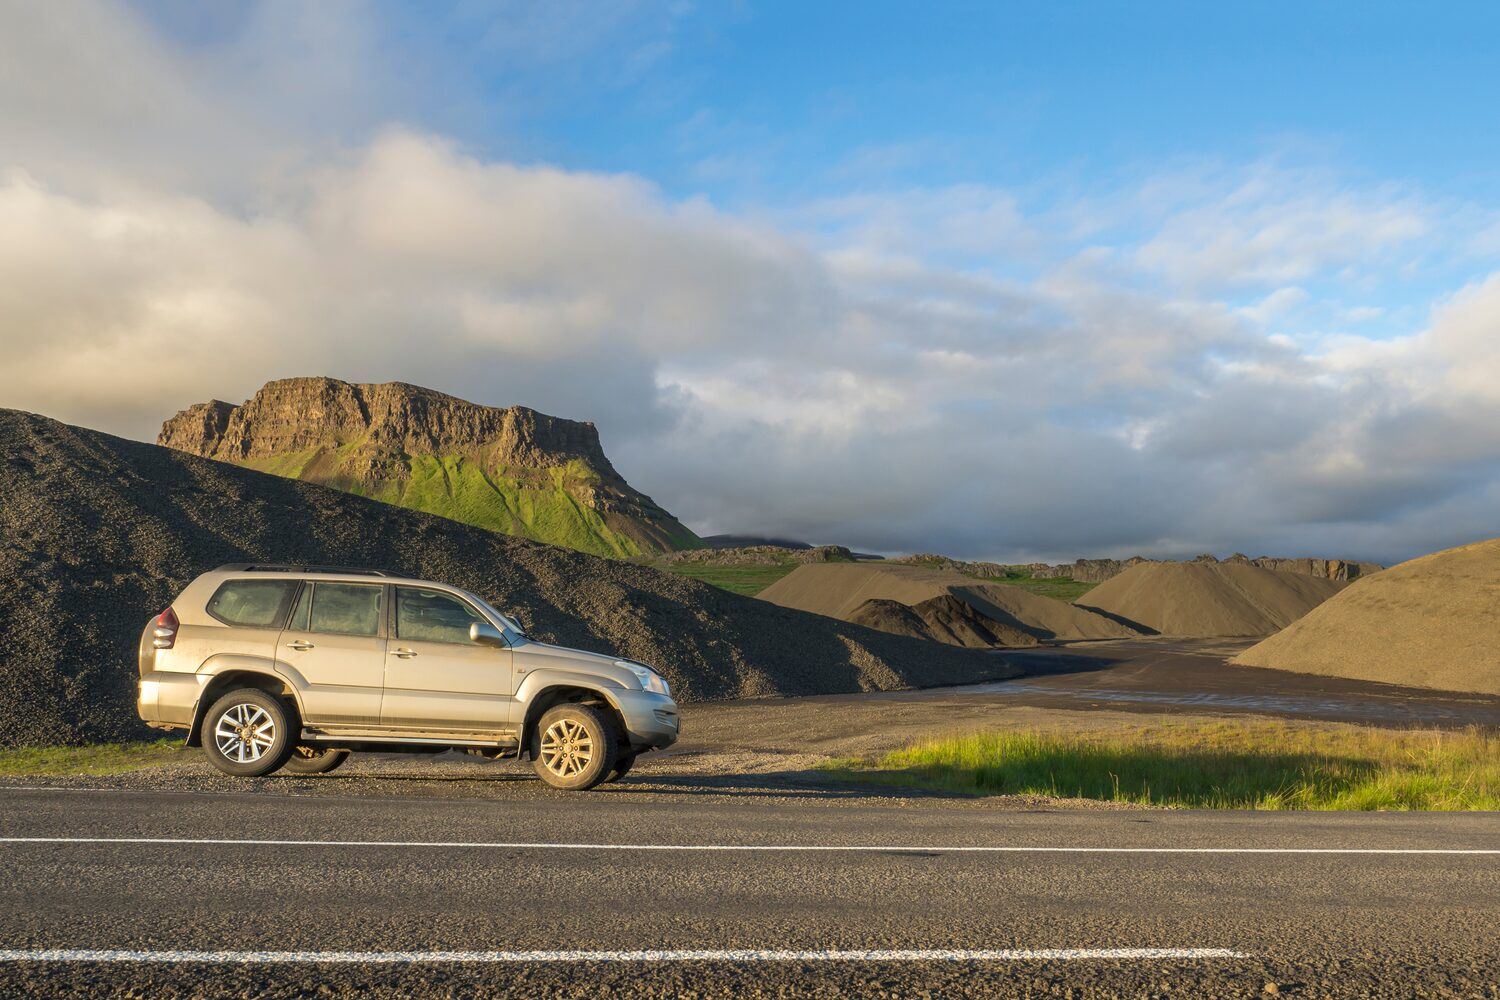 Grey Toyota Land Cruiser Prado parked infront of mountain in scenic Iceland countryside.